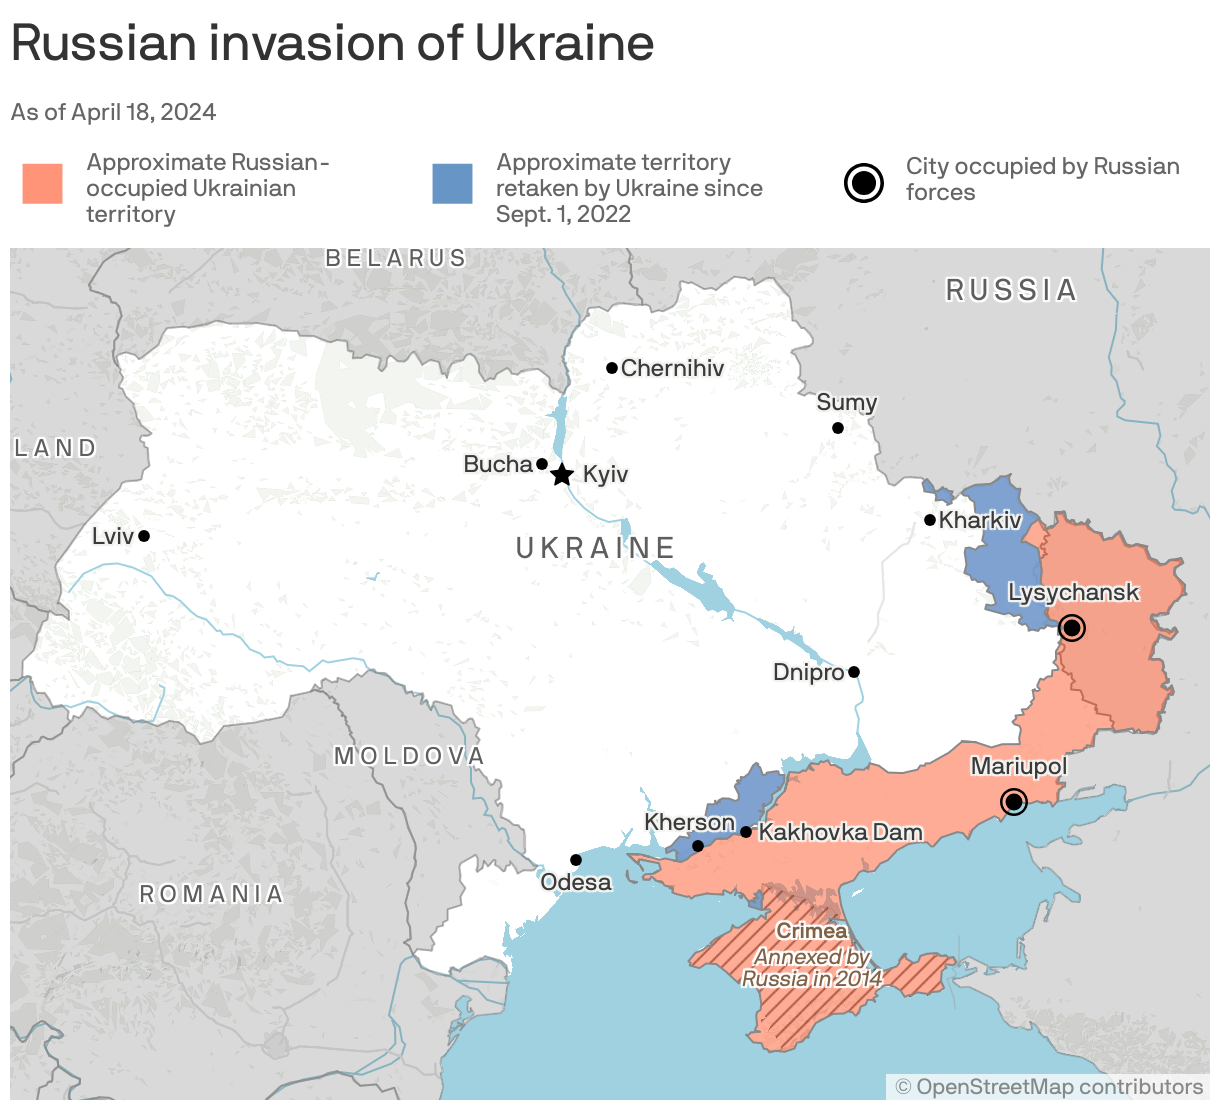 Russian invasion of Ukraine, as of April 13